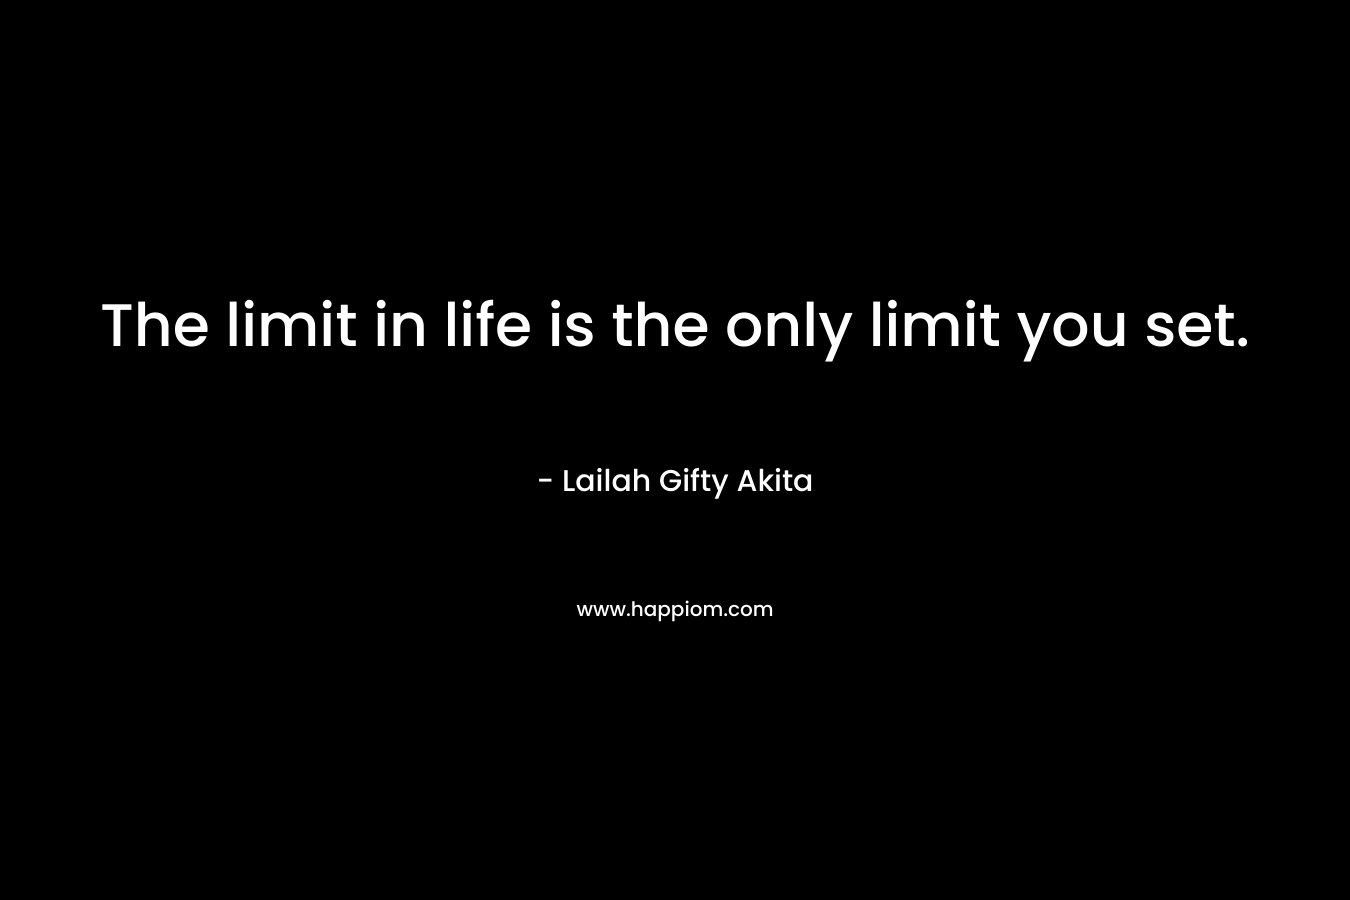 The limit in life is the only limit you set.